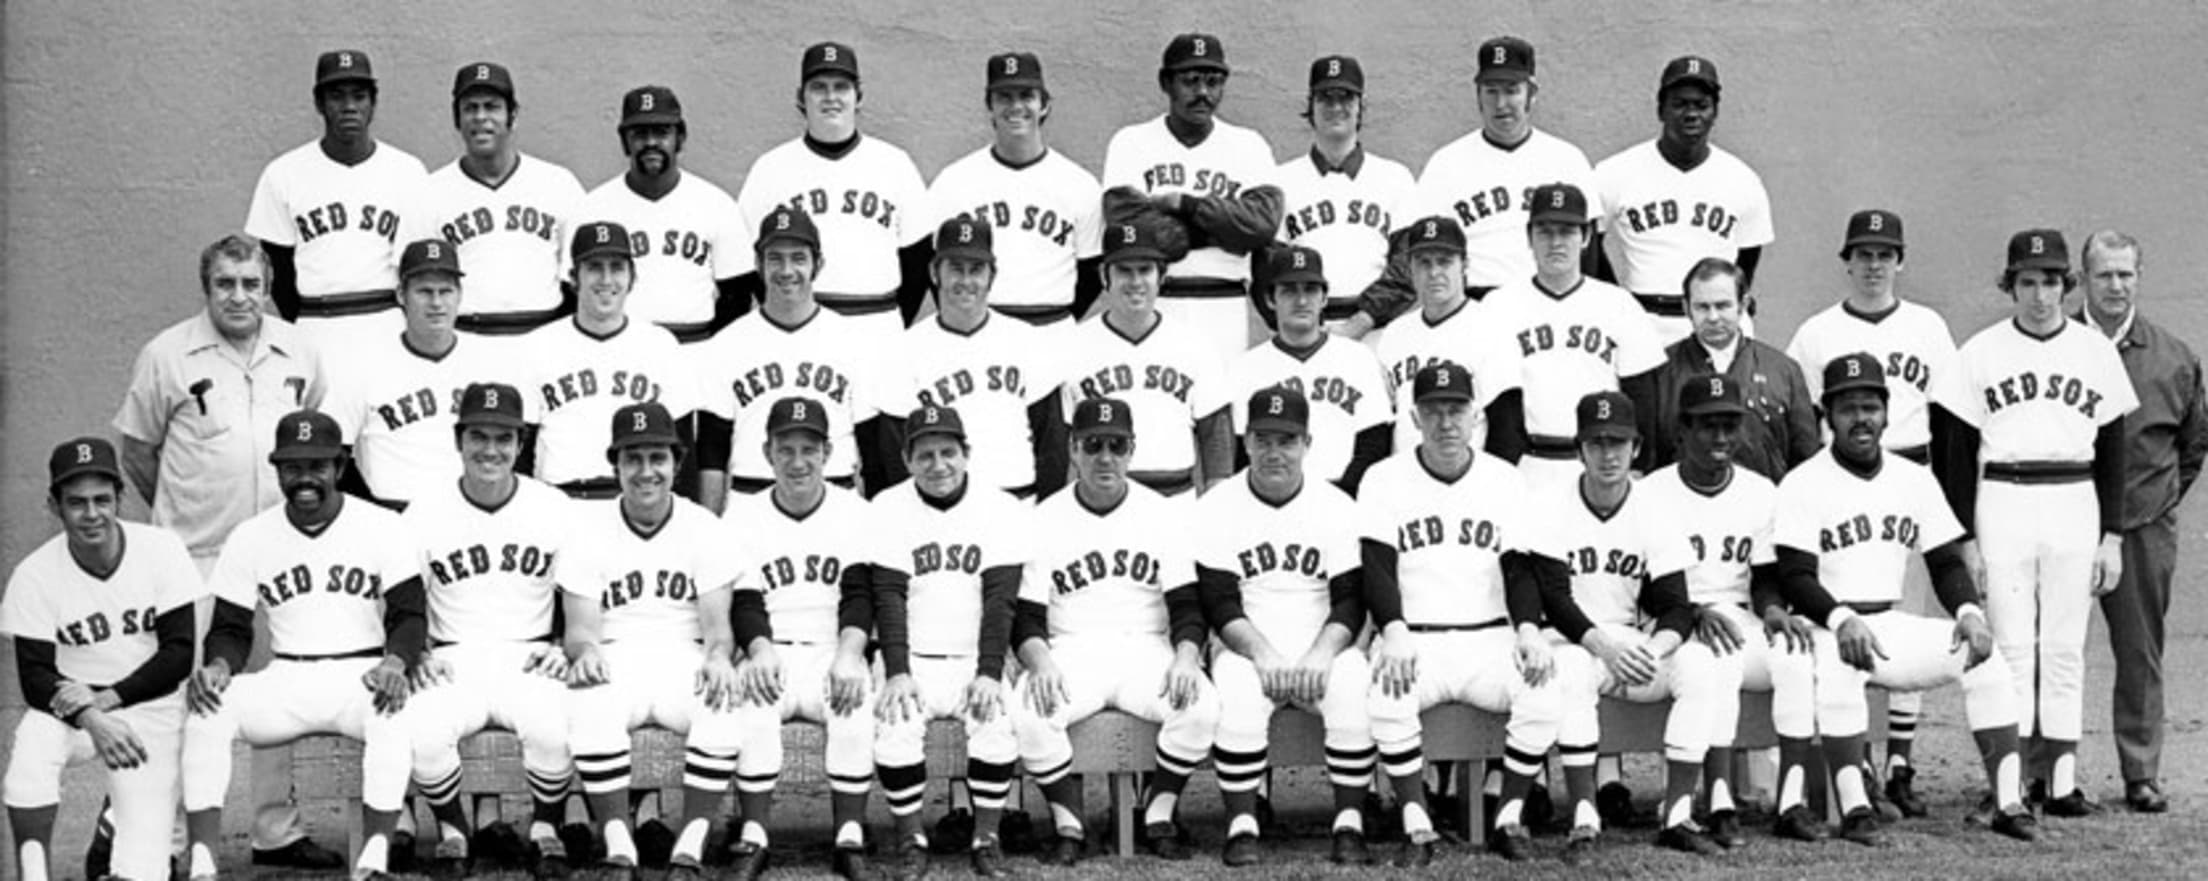 1975 Bristol Red Sox - Roster